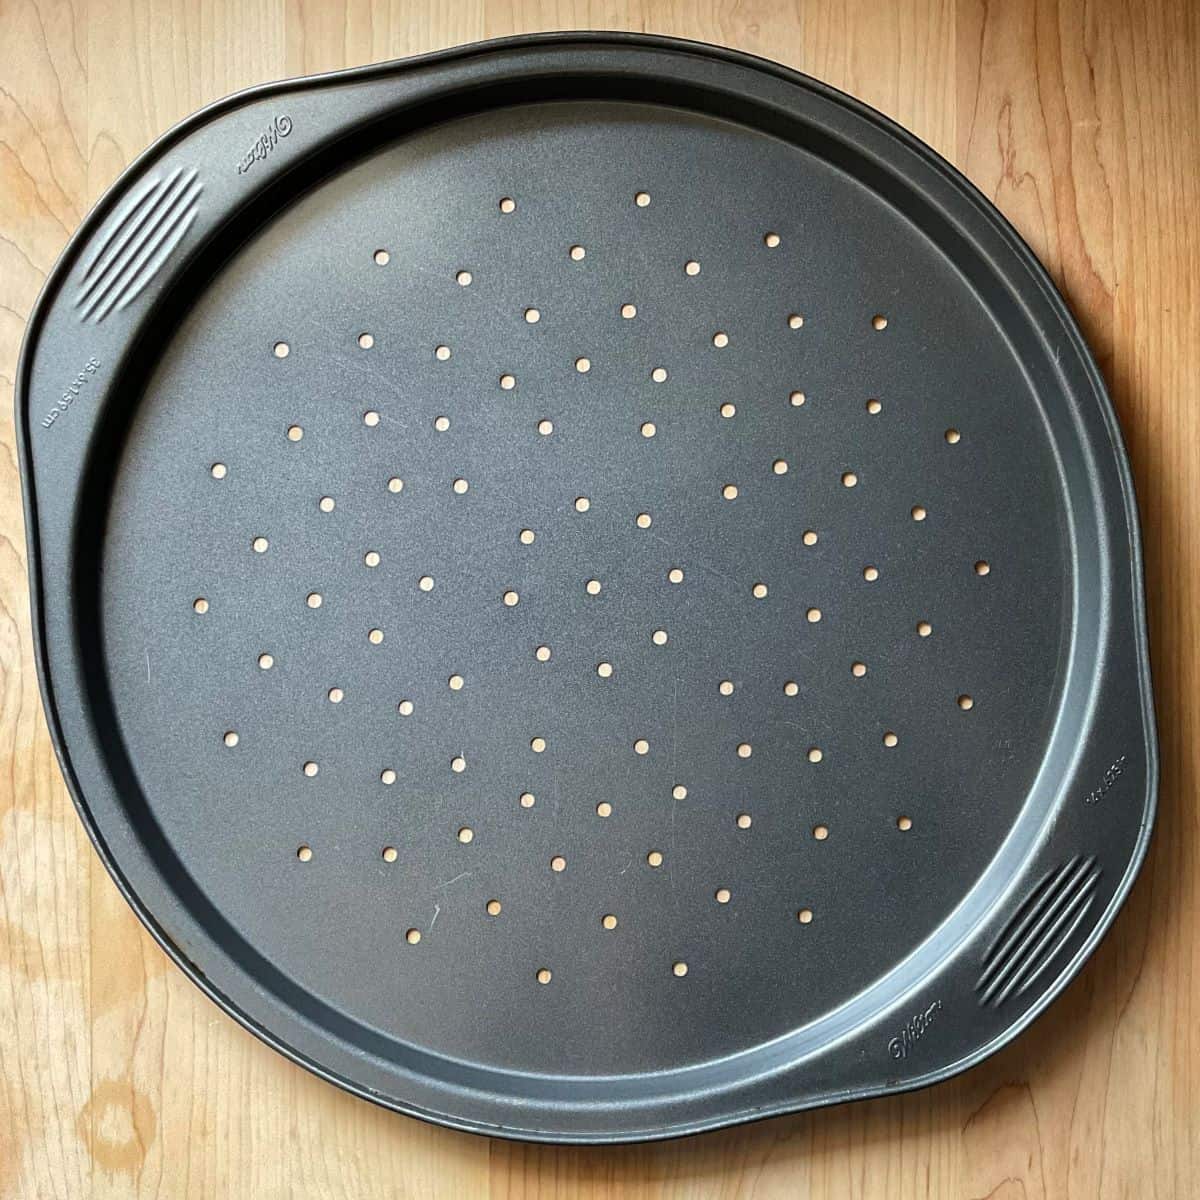 A perforated pizza pan to make escarole pie.